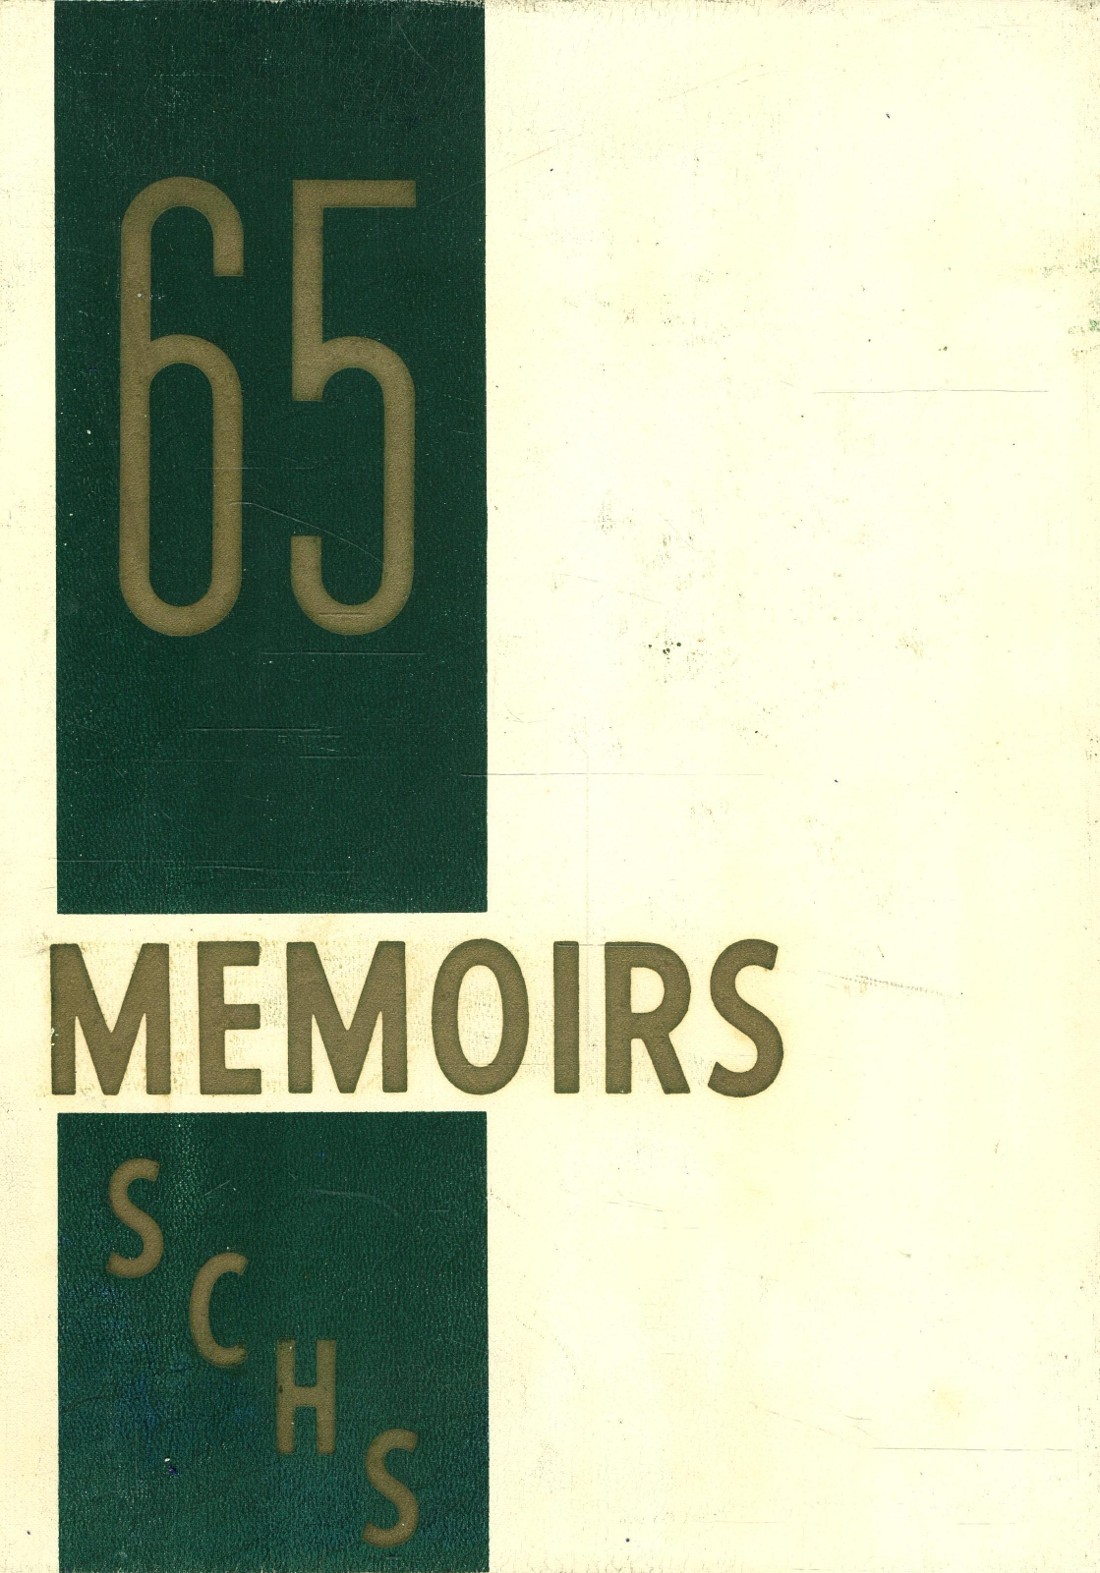 1965 yearbook from South Charleston High School from South charleston